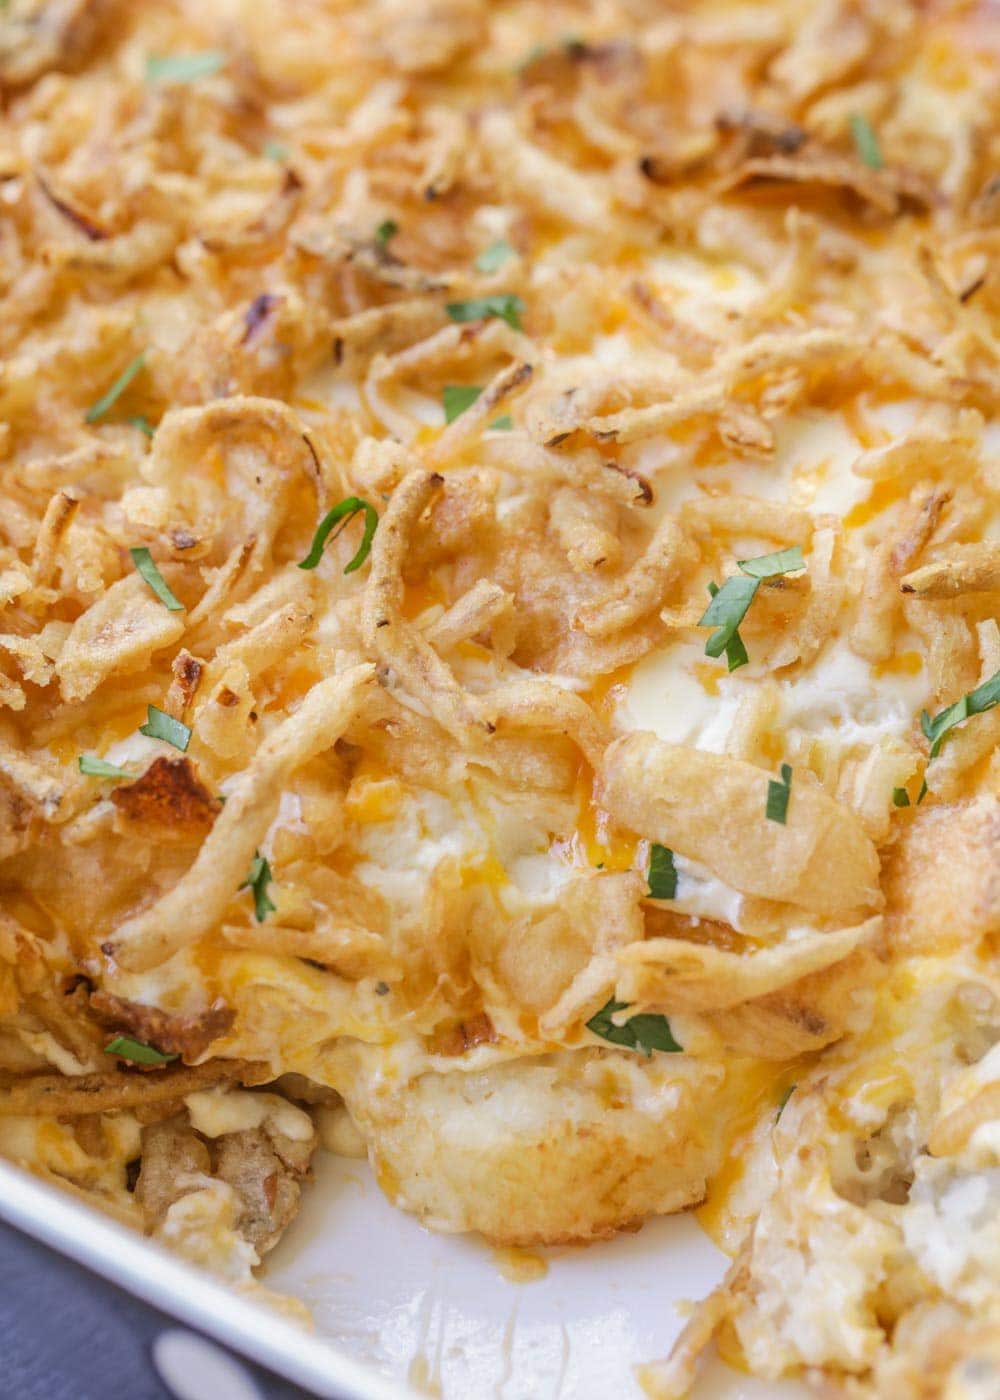 Easy tater tot casserole recipe topped with fresh herbs.